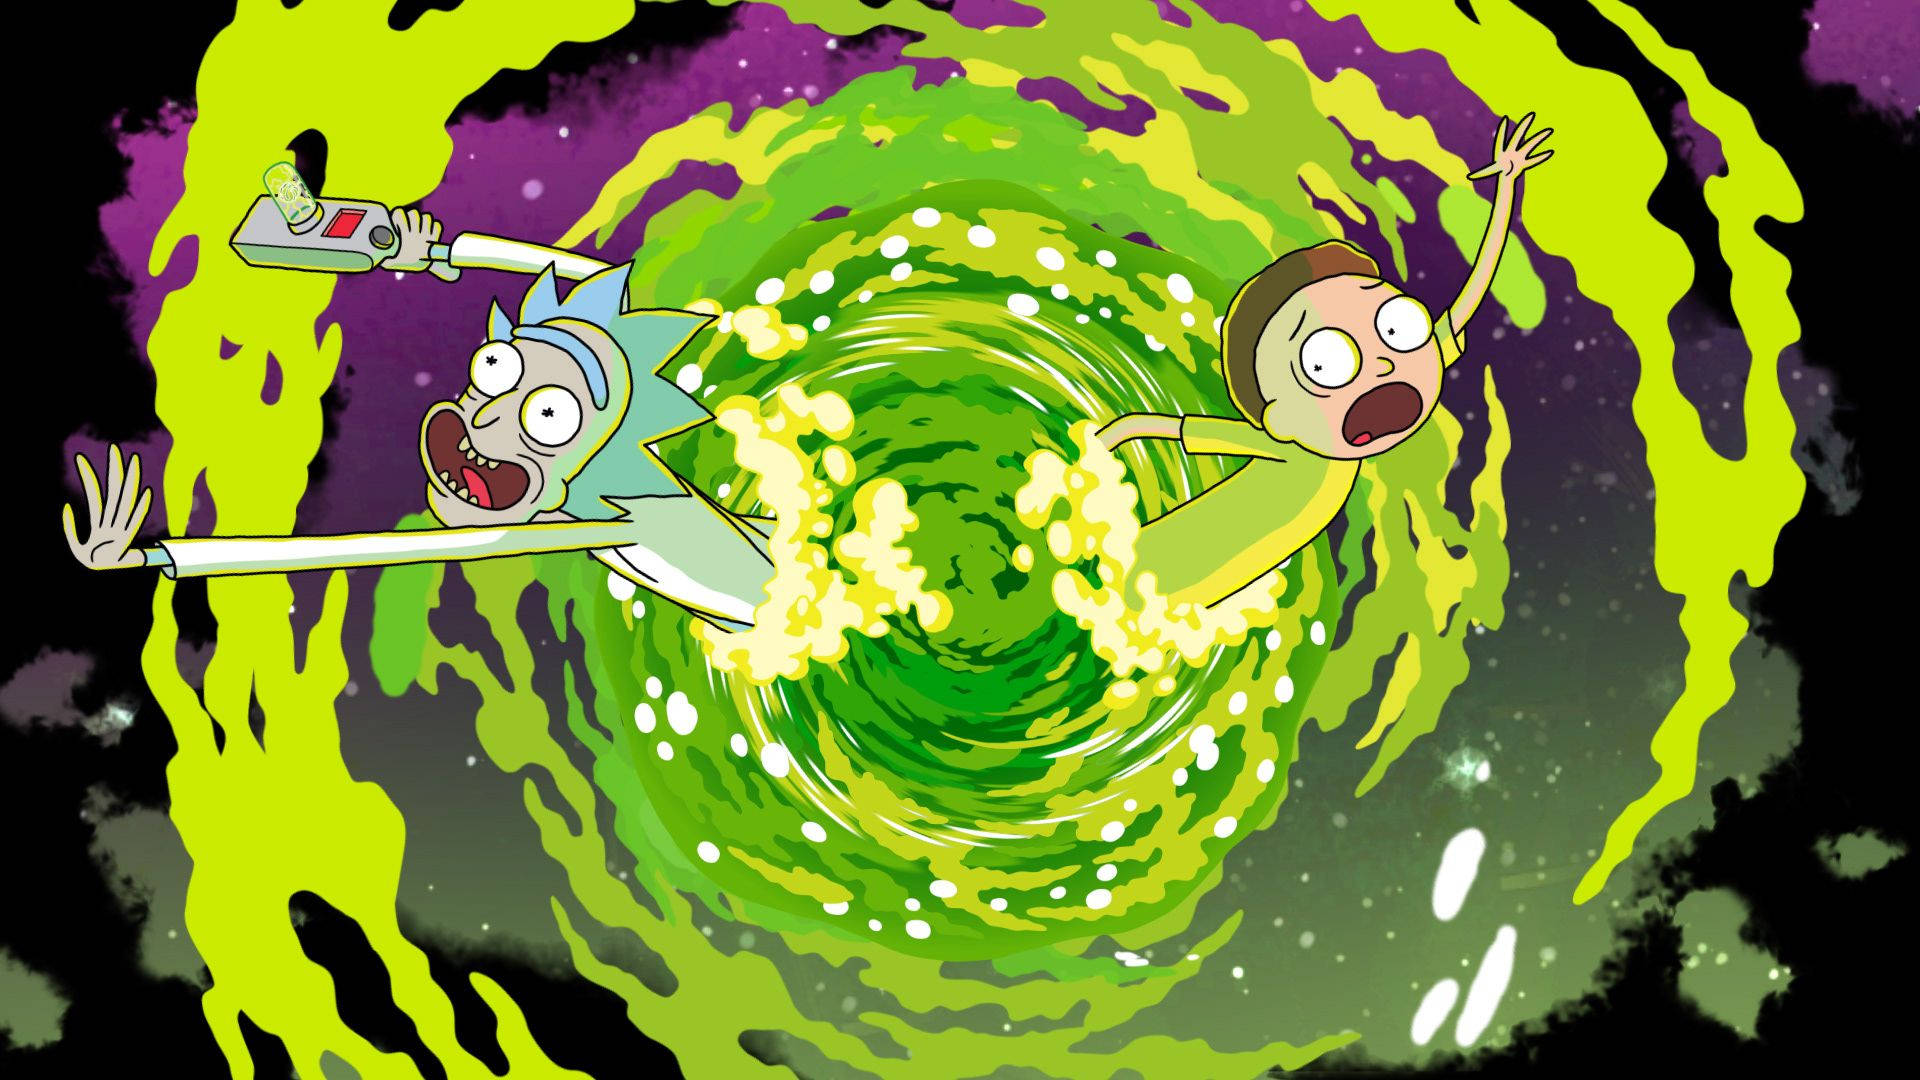 Emotional Moment In Rick And Morty Wallpaper